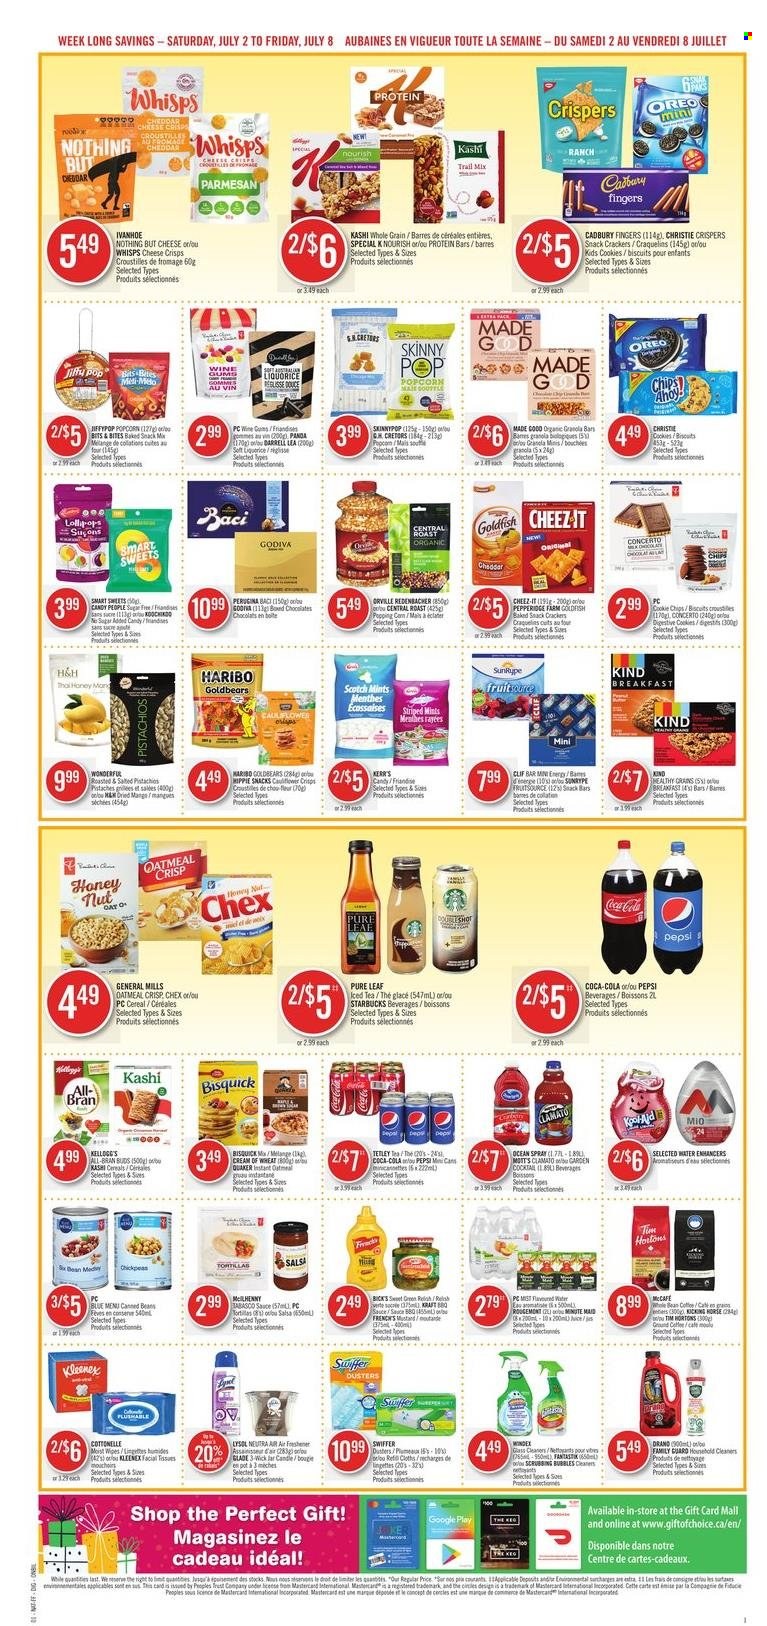 thumbnail - Shoppers Drug Mart Flyer - July 02, 2022 - July 08, 2022 - Sales products - tortillas, pie, cod, sauce, Quaker, parmesan, cookies, chocolate, snack, Haribo, Godiva, crackers, lollipop, Kellogg's, biscuit, Cadbury, Digestive, snack bar, chips, popcorn, Goldfish, Cheez-It, Skinny Pop, Bisquick, tabasco, oatmeal, cereals, Cream of Wheat, protein bar, granola bar, All-Bran, salsa, pistachios, trail mix, Coca-Cola, Pepsi, ice tea, Clamato, fruit punch, Pure Leaf, coffee, ground coffee, Starbucks, McCafe, Cottonelle, Kleenex, tissues, Windex, Scrubbing Bubbles, Swiffer, facial tissues, pot, candle, air freshener, Glade, panda, granola, Oreo, M&M's. Page 6.